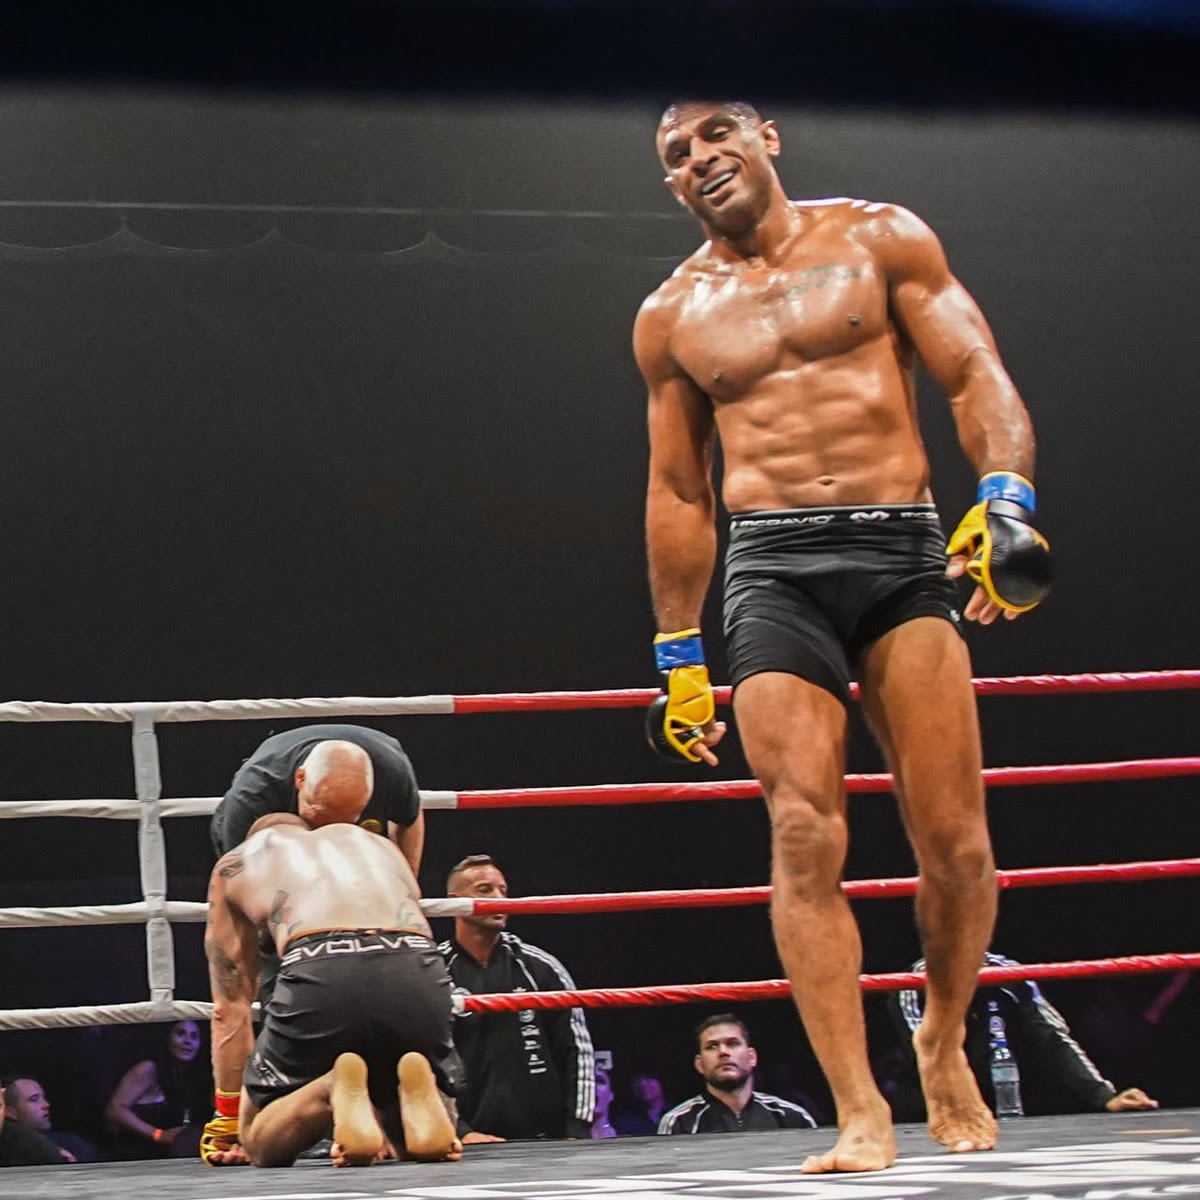 Roan 'Jucao' Carneiro wins WKN middleweight MMA title at NZ World Cup - MMA